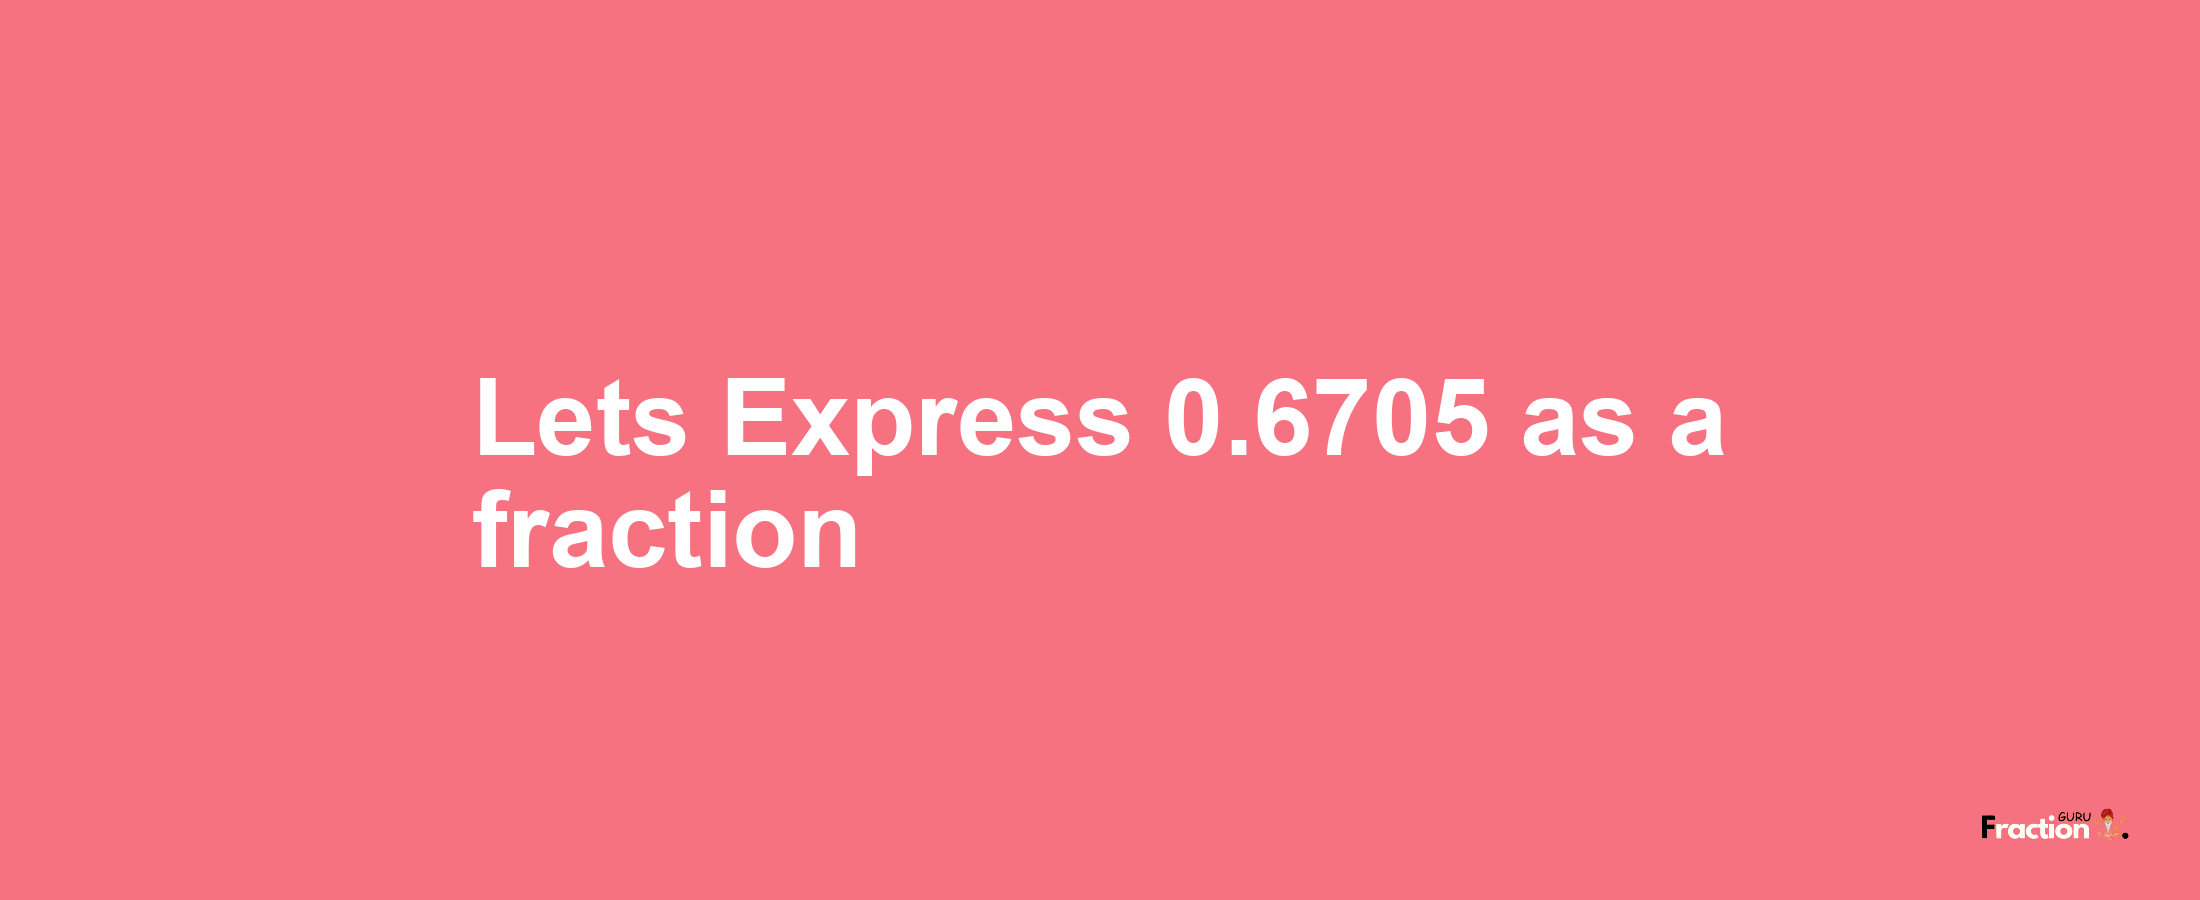 Lets Express 0.6705 as afraction